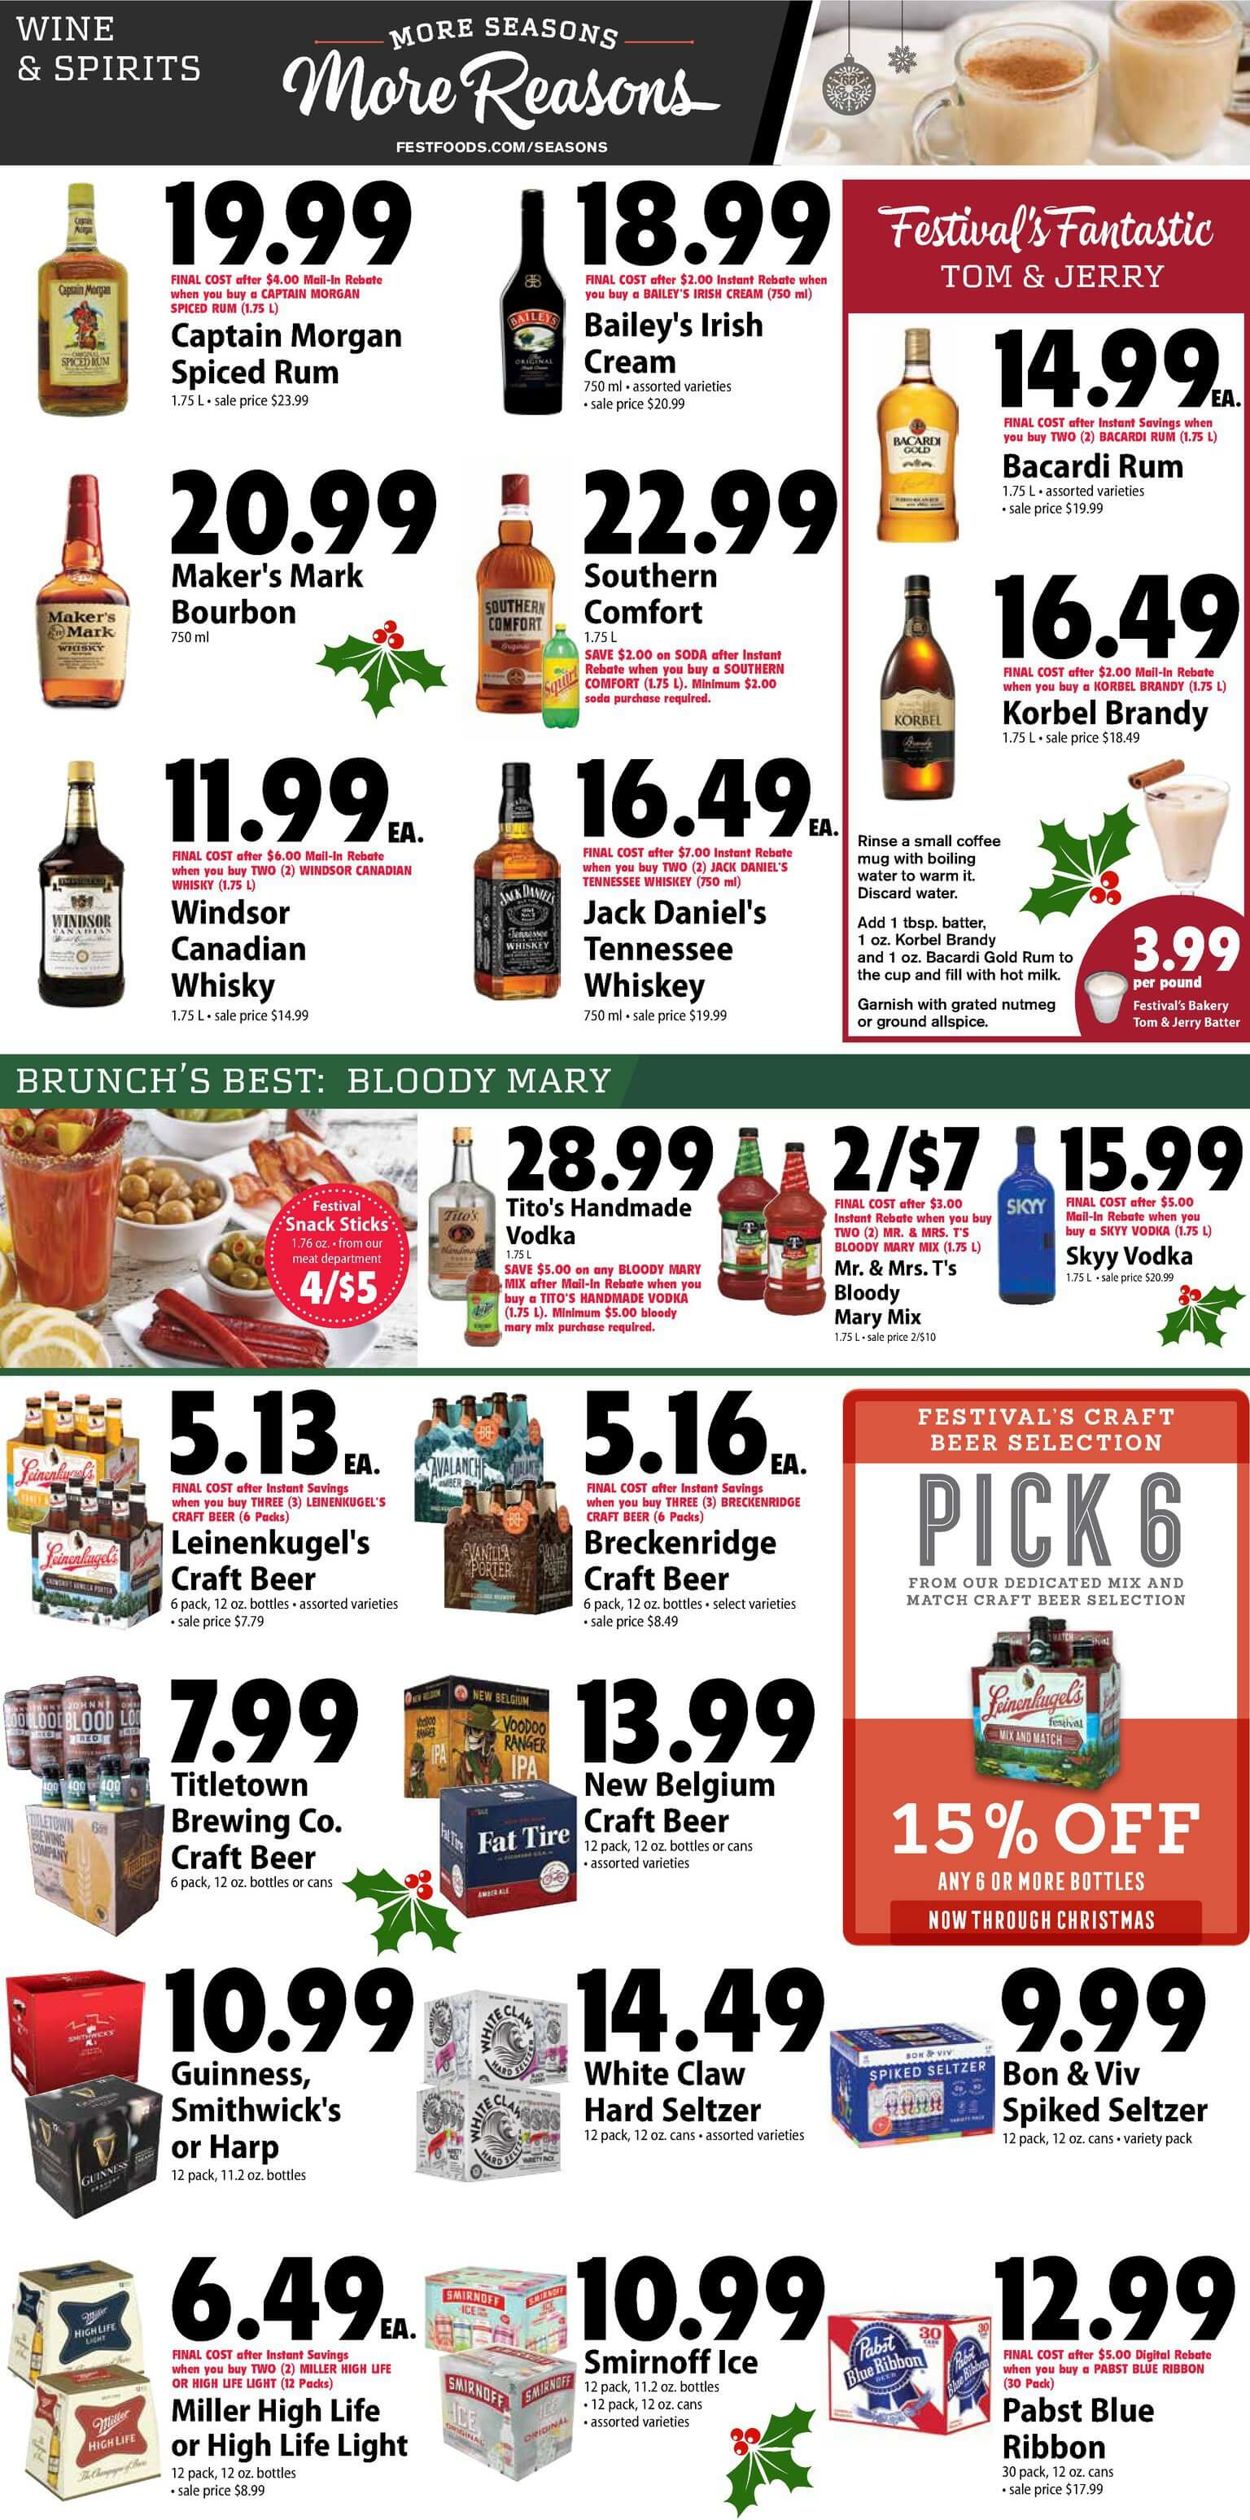 Festival Foods - Christmas Ad 2019 Weekly Ad Circular - valid 12/11-12/17/2019 (Page 8)